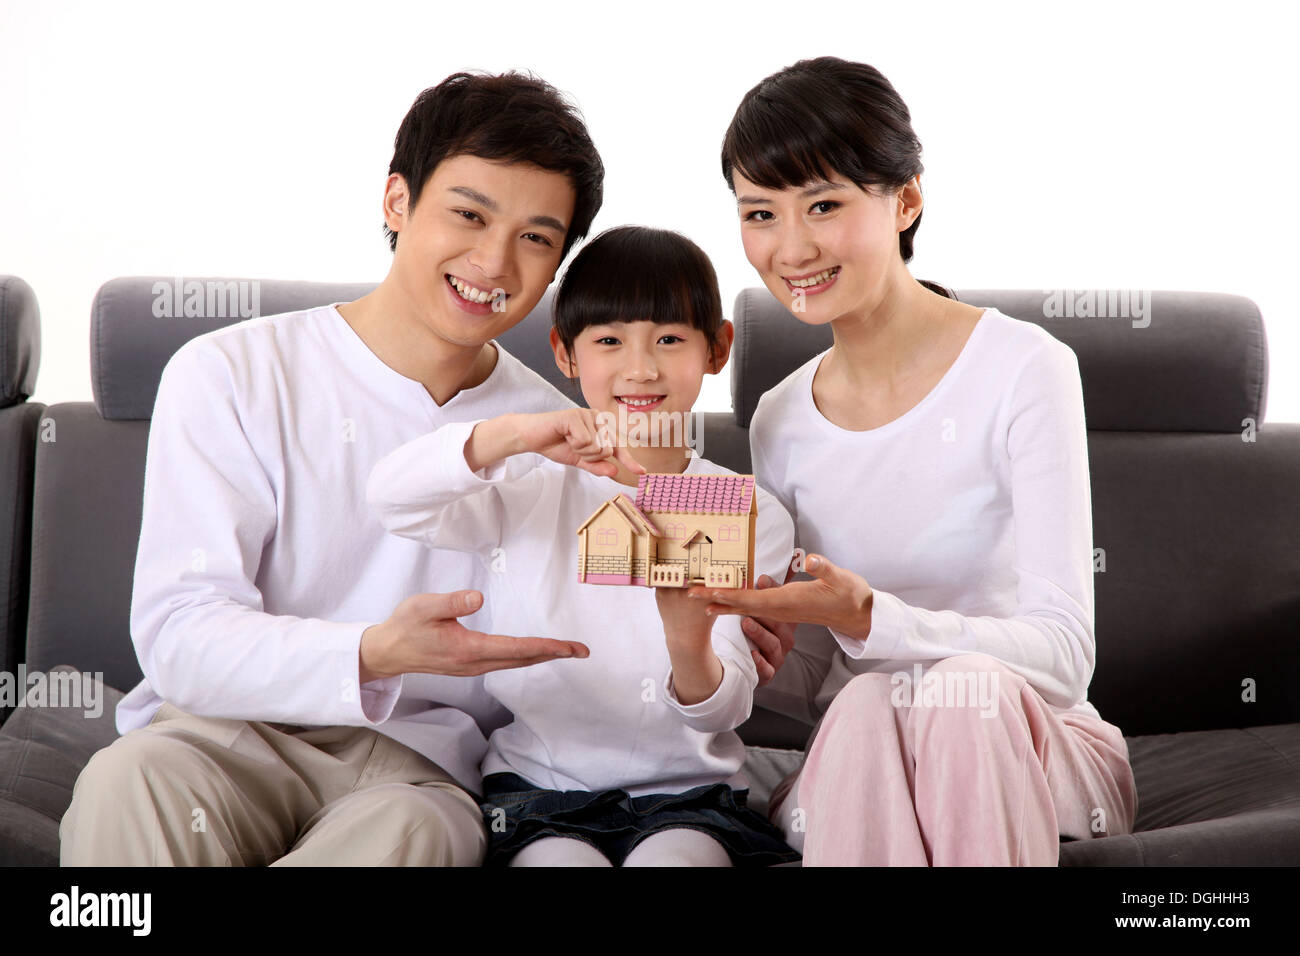 East Asian family with one child sitting on the sofa, holding a model house Stock Photo